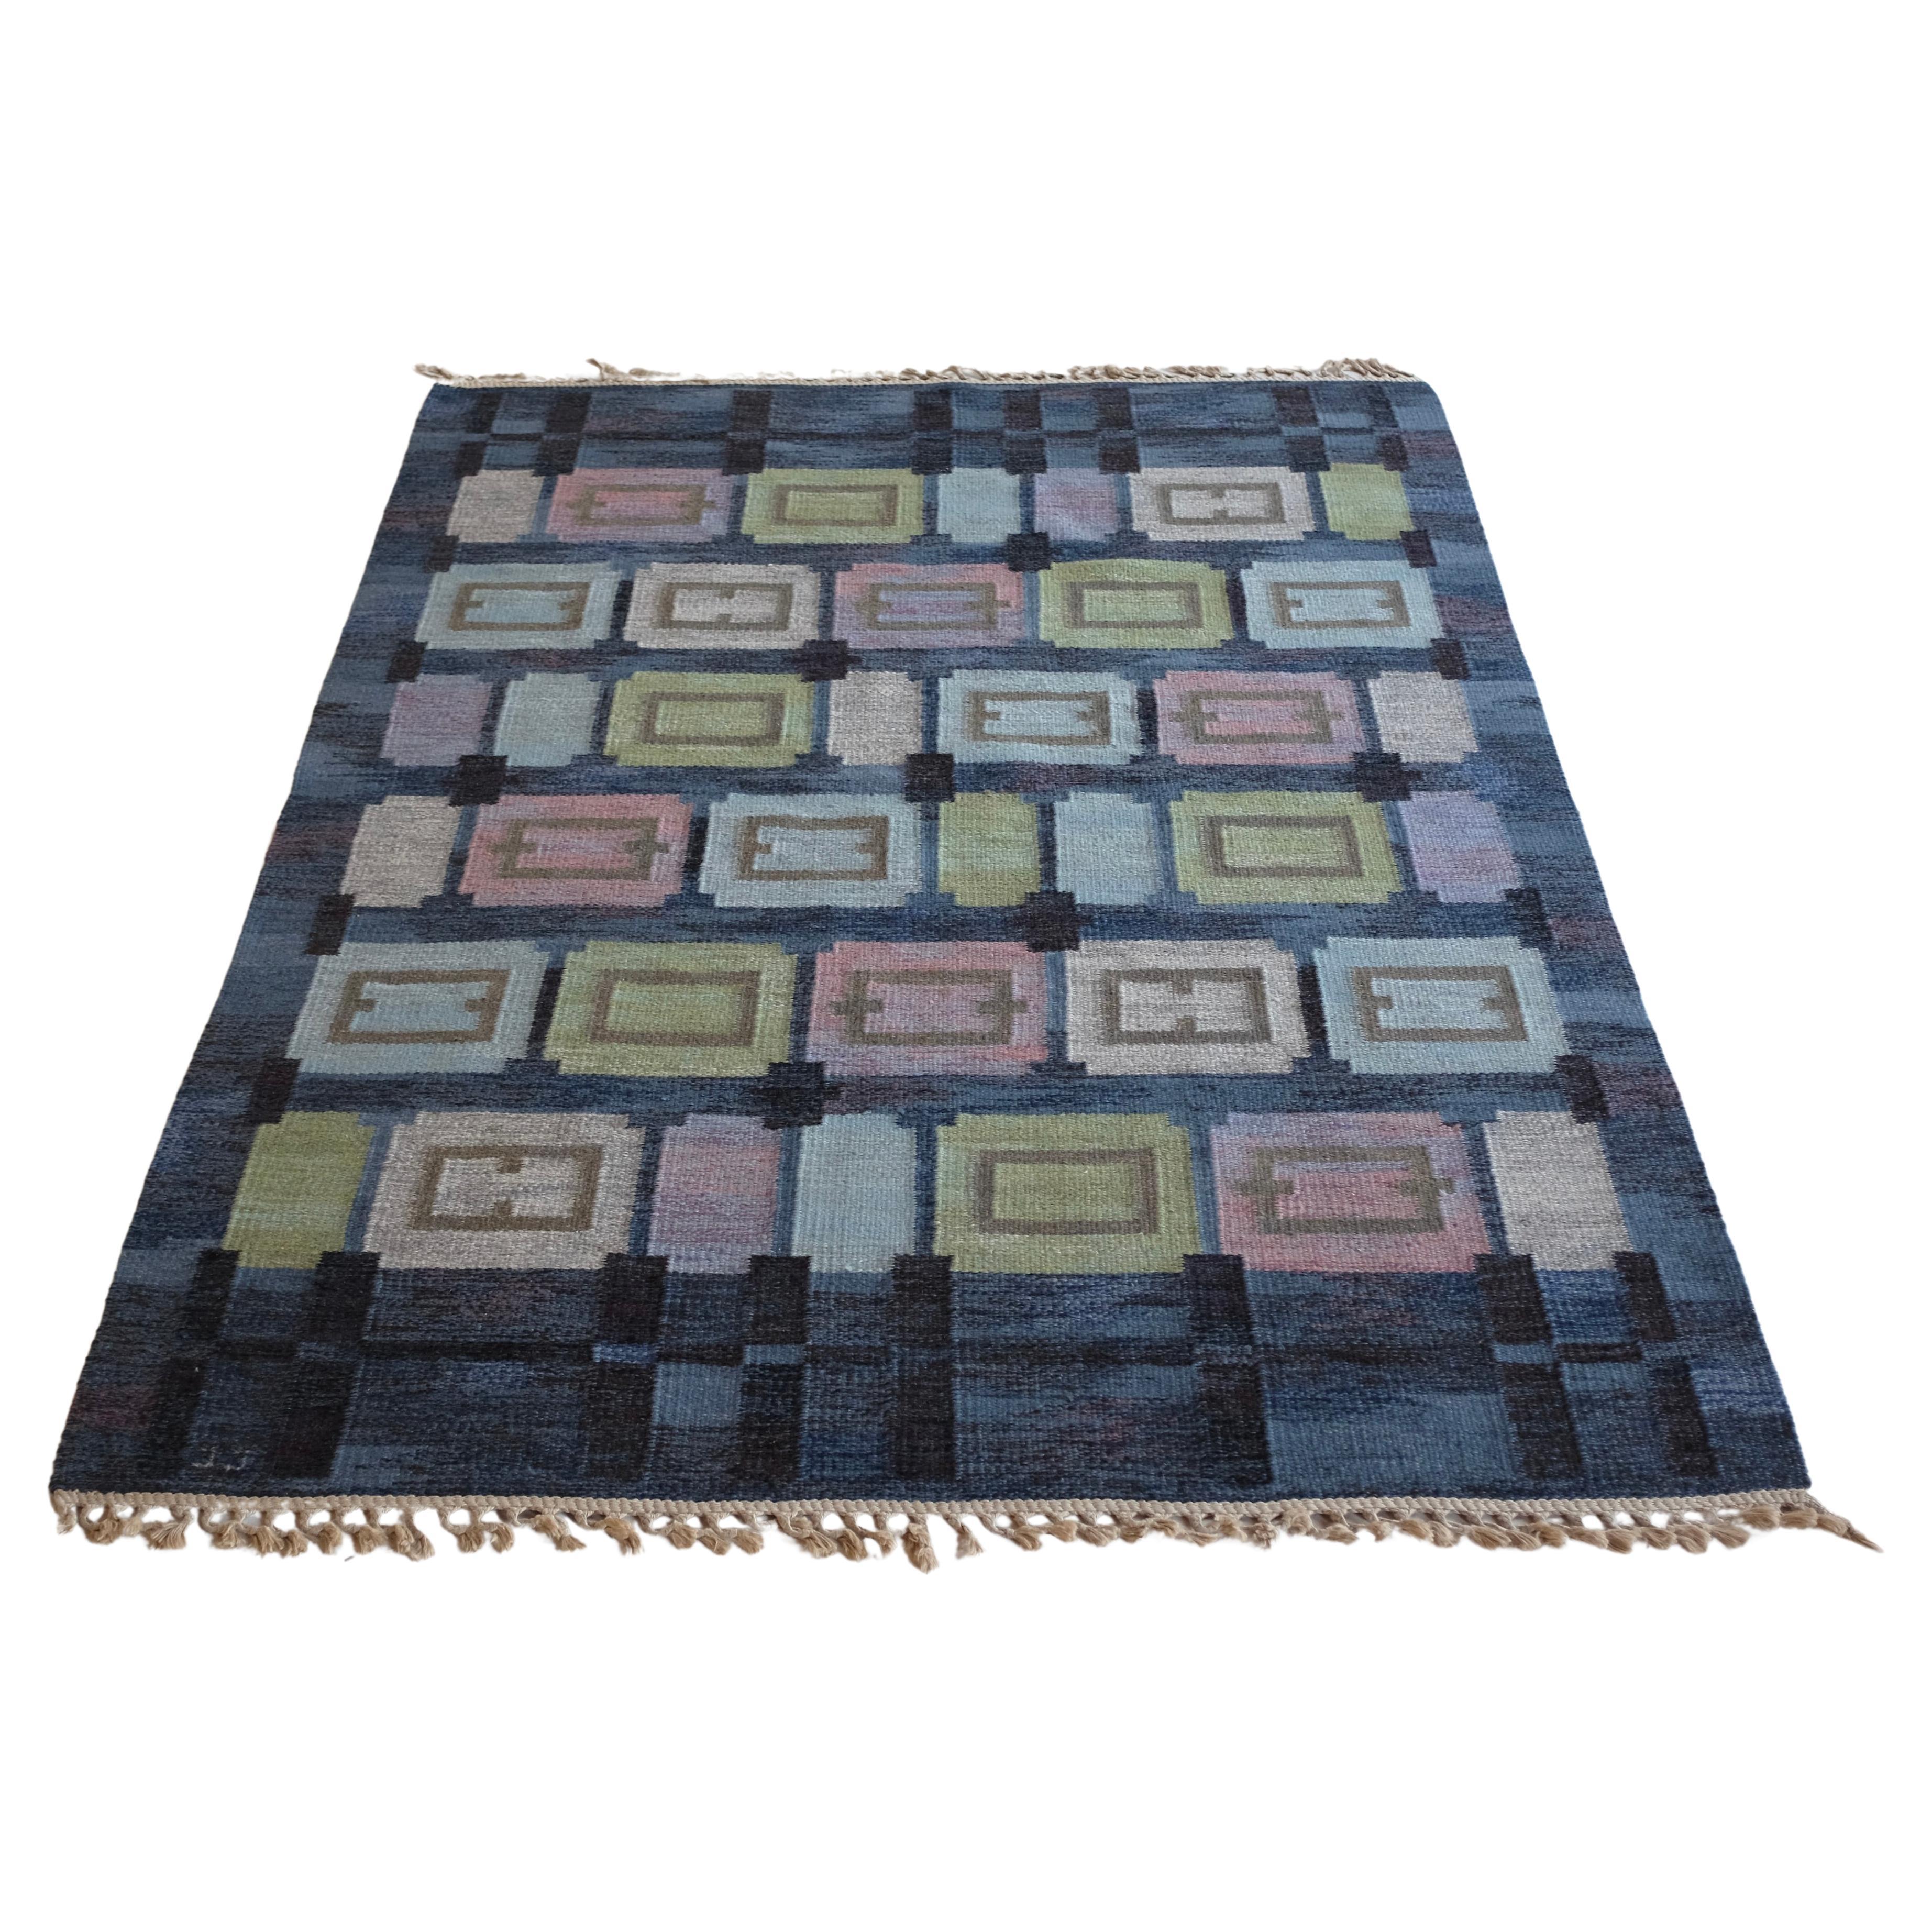 Spise Hall rug by Judith Johansson For Sale